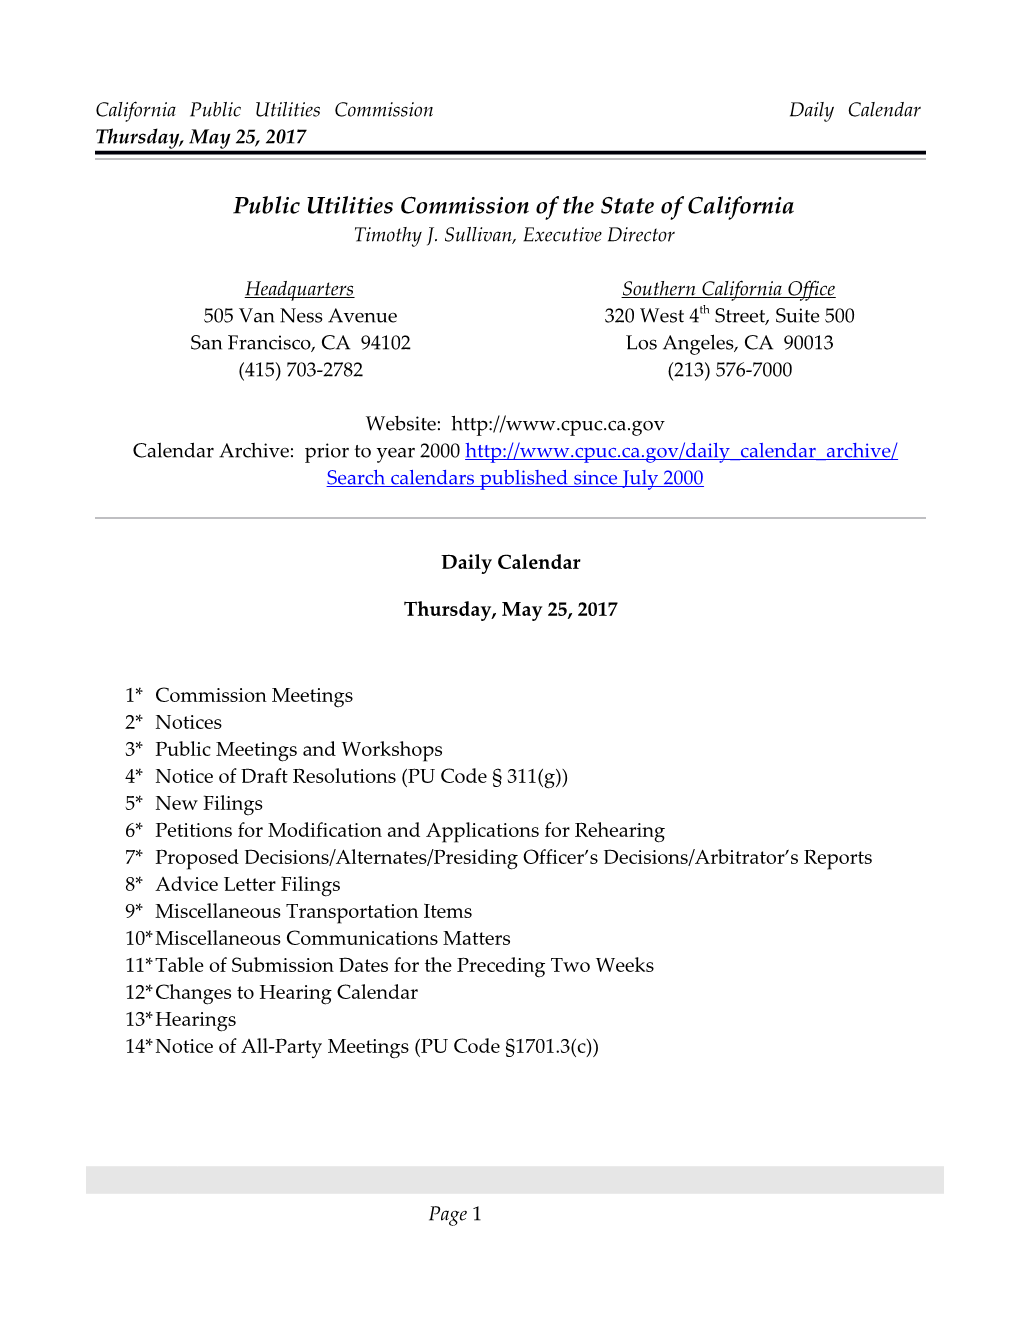 California Public Utilities Commission Daily Calendar Thursday, May 25, 2017